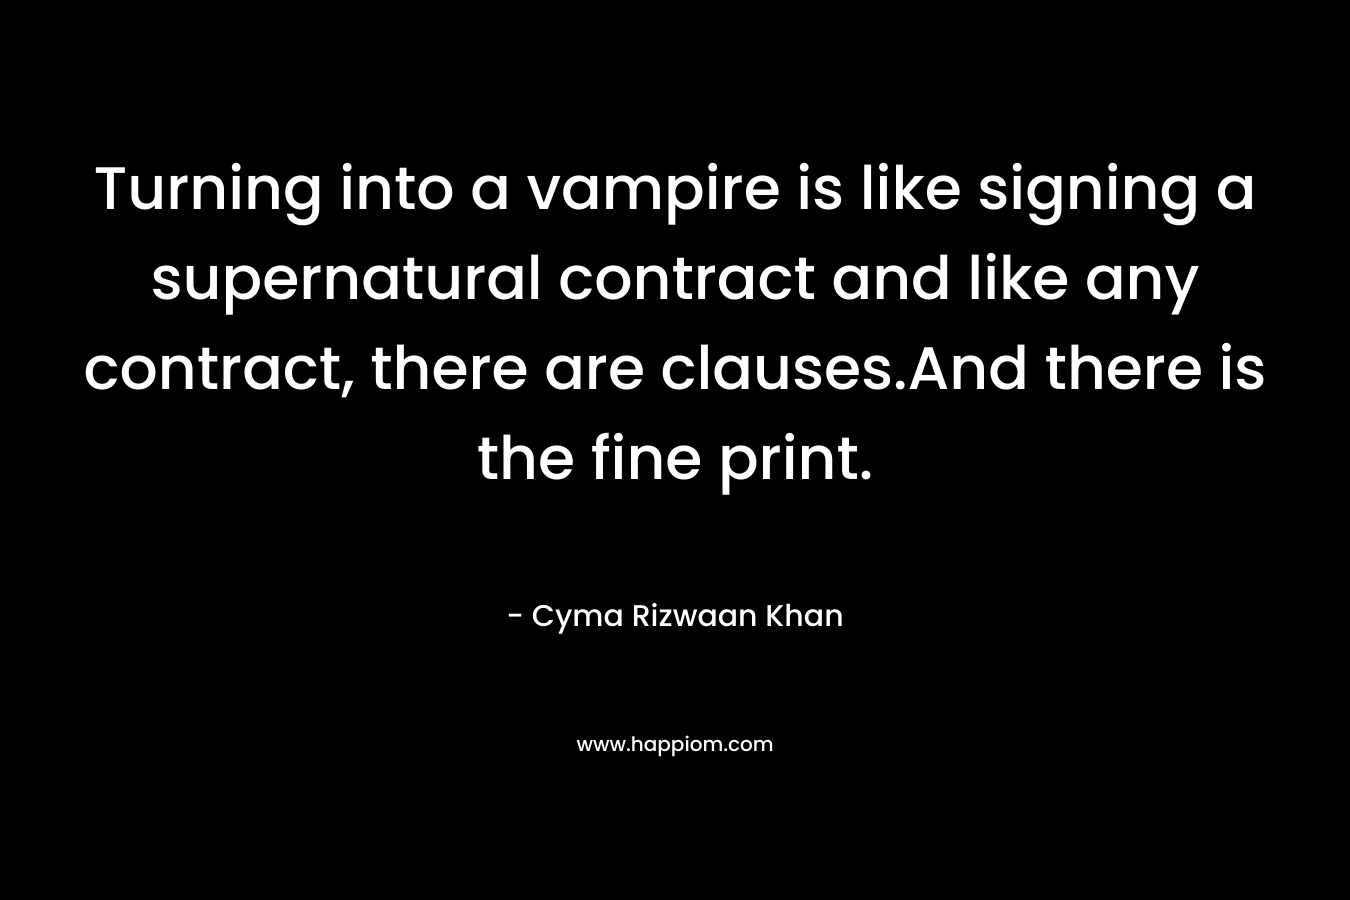 Turning into a vampire is like signing a supernatural contract and like any contract, there are clauses.And there is the fine print.